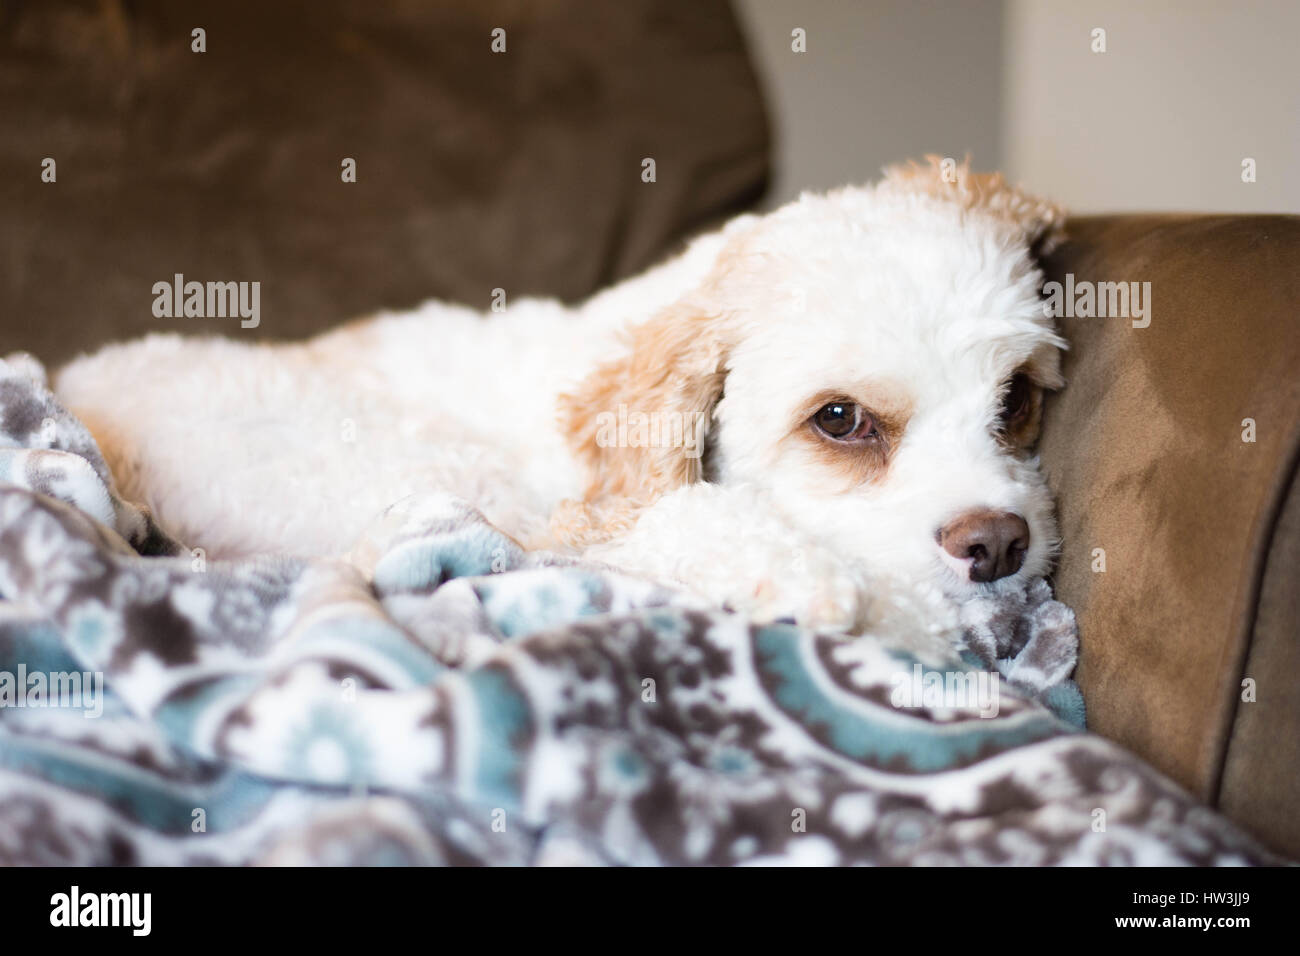 White and brown furry dog snuggled with a blanket on the couch. Stock Photo